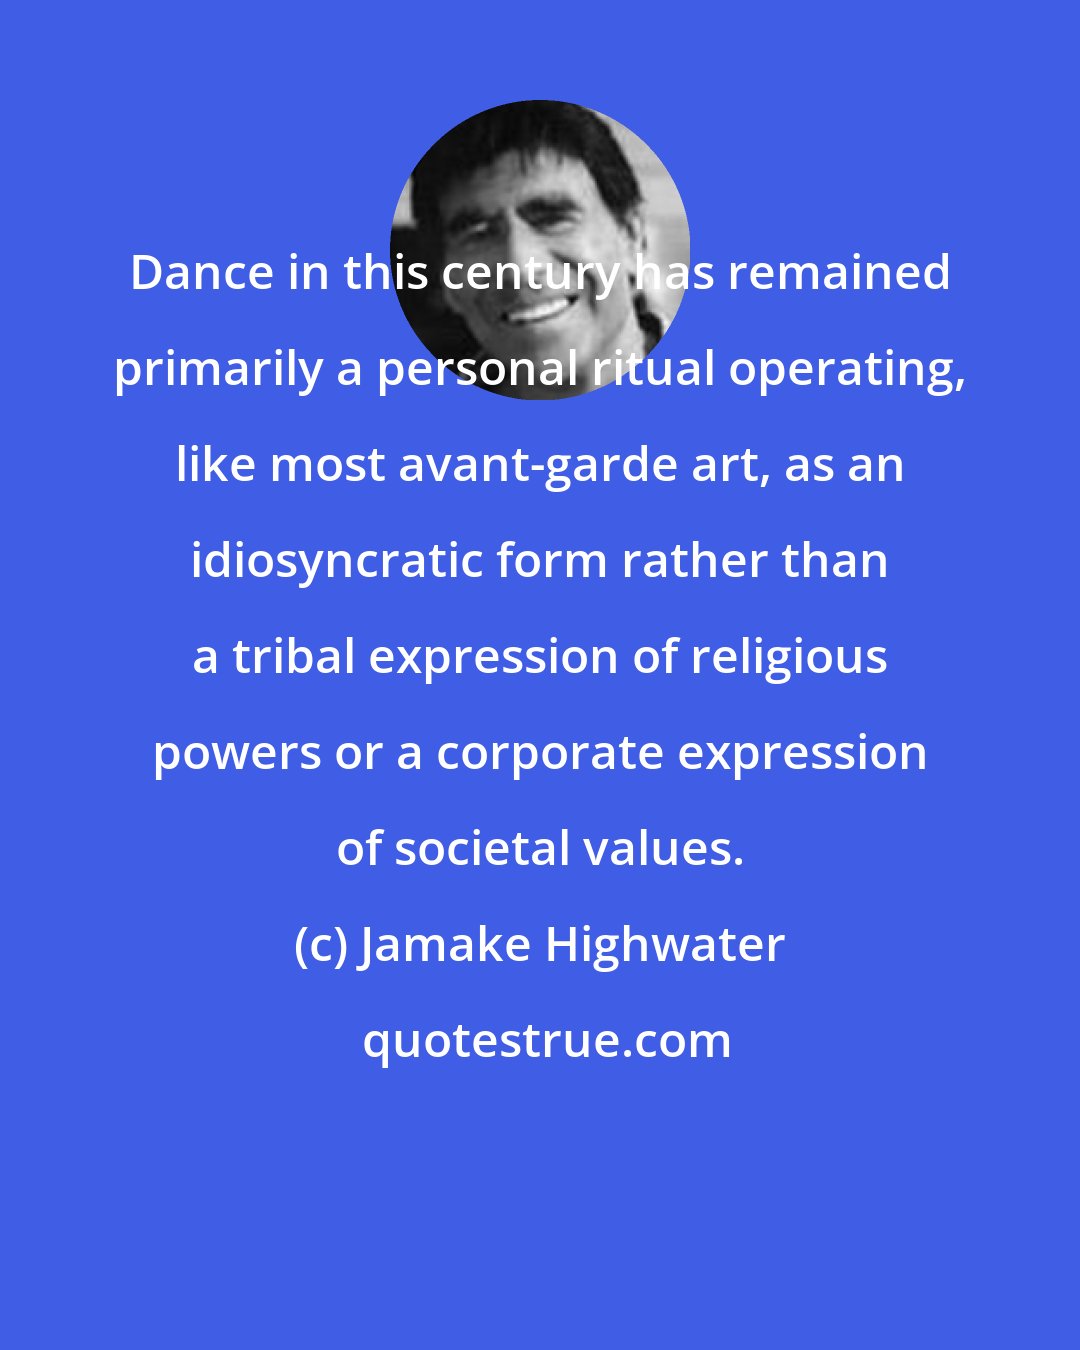 Jamake Highwater: Dance in this century has remained primarily a personal ritual operating, like most avant-garde art, as an idiosyncratic form rather than a tribal expression of religious powers or a corporate expression of societal values.